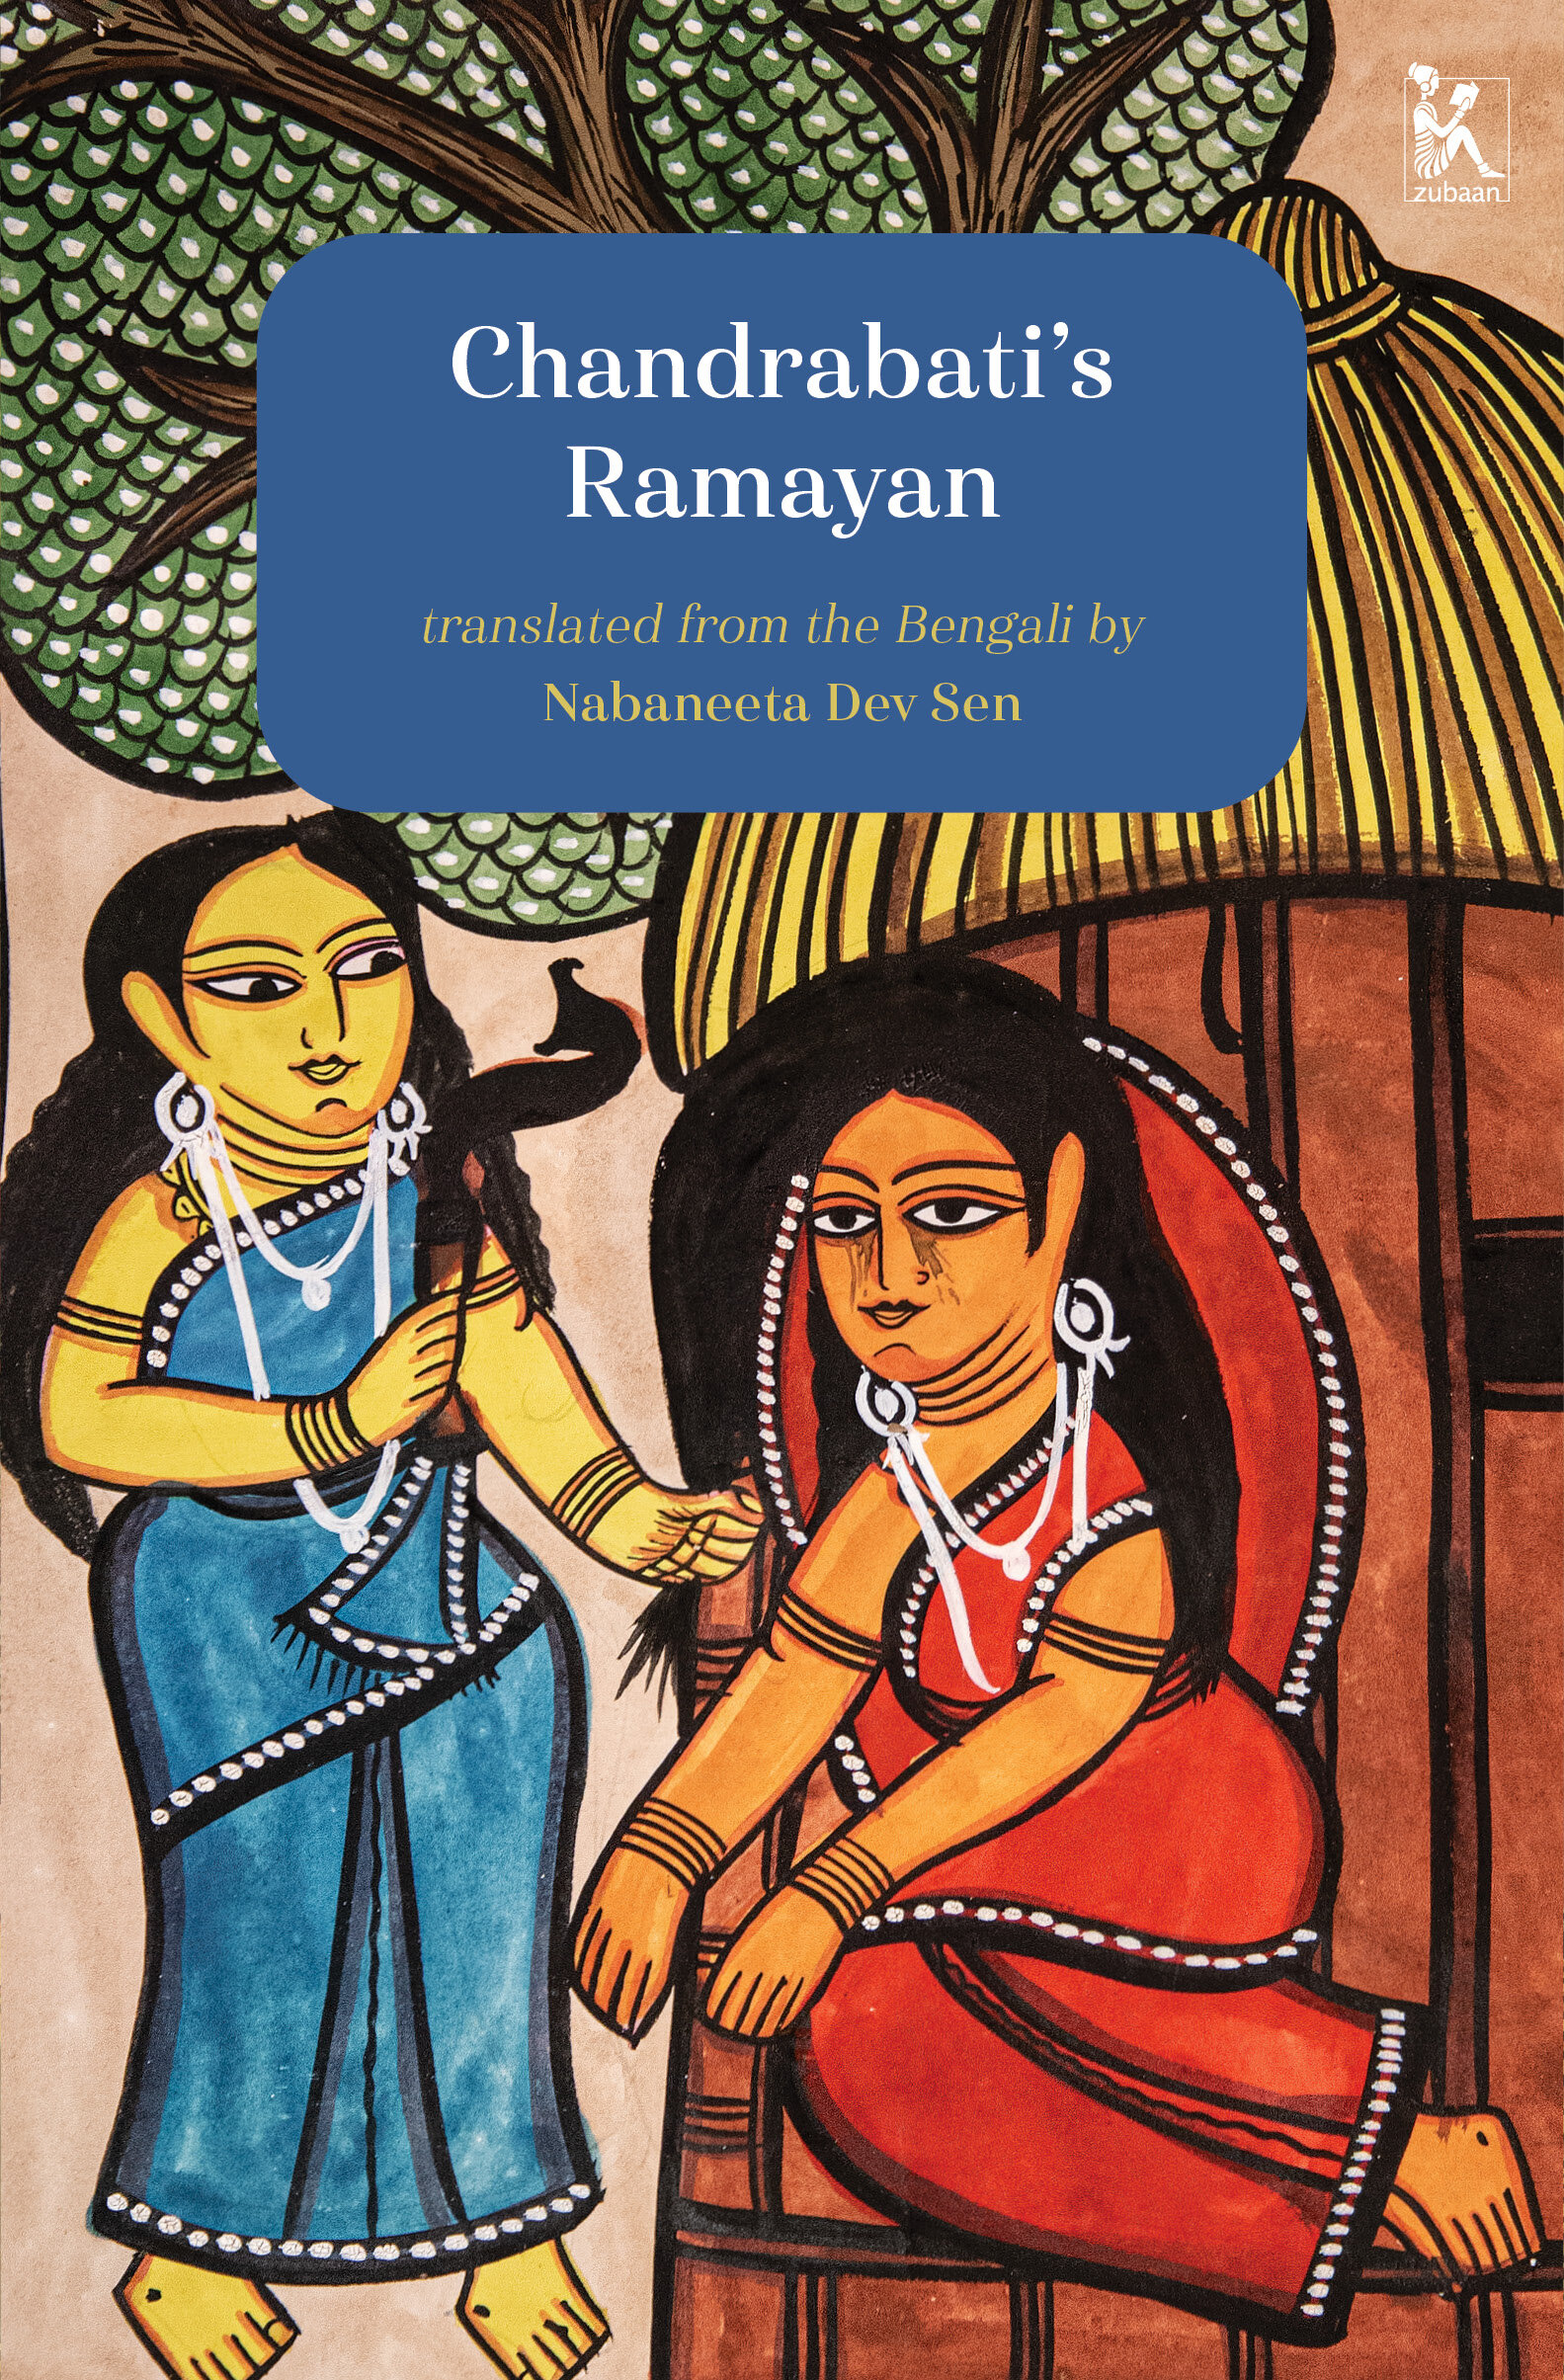 Chandrabati's Ramayan — Open Letters Review